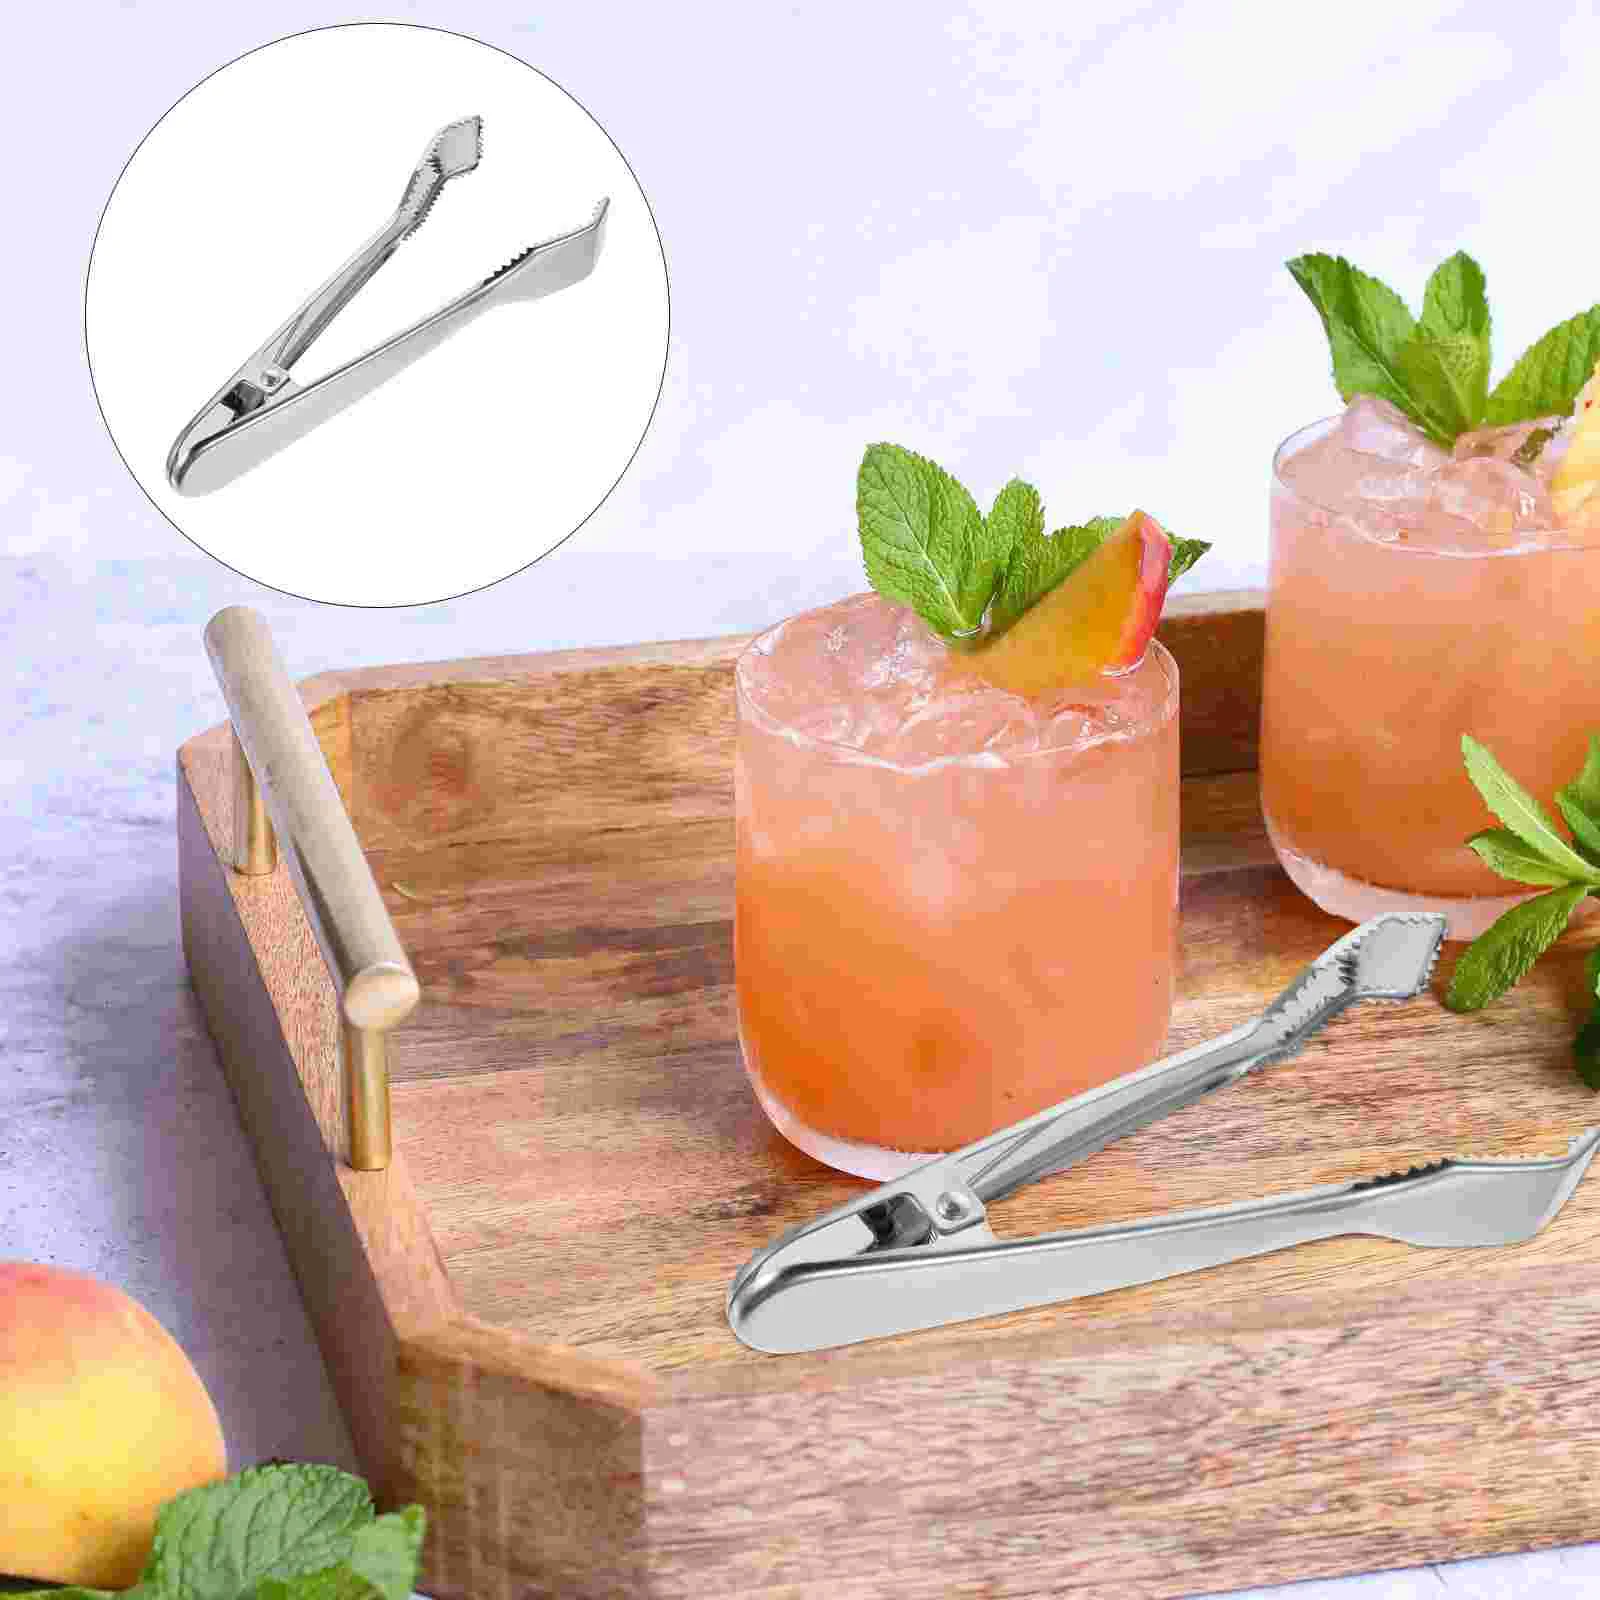 

Steak Stainless Steel Ice Clamp Multifunctional Durable Clip Mini Pliers Food Cubes Fruit Tong